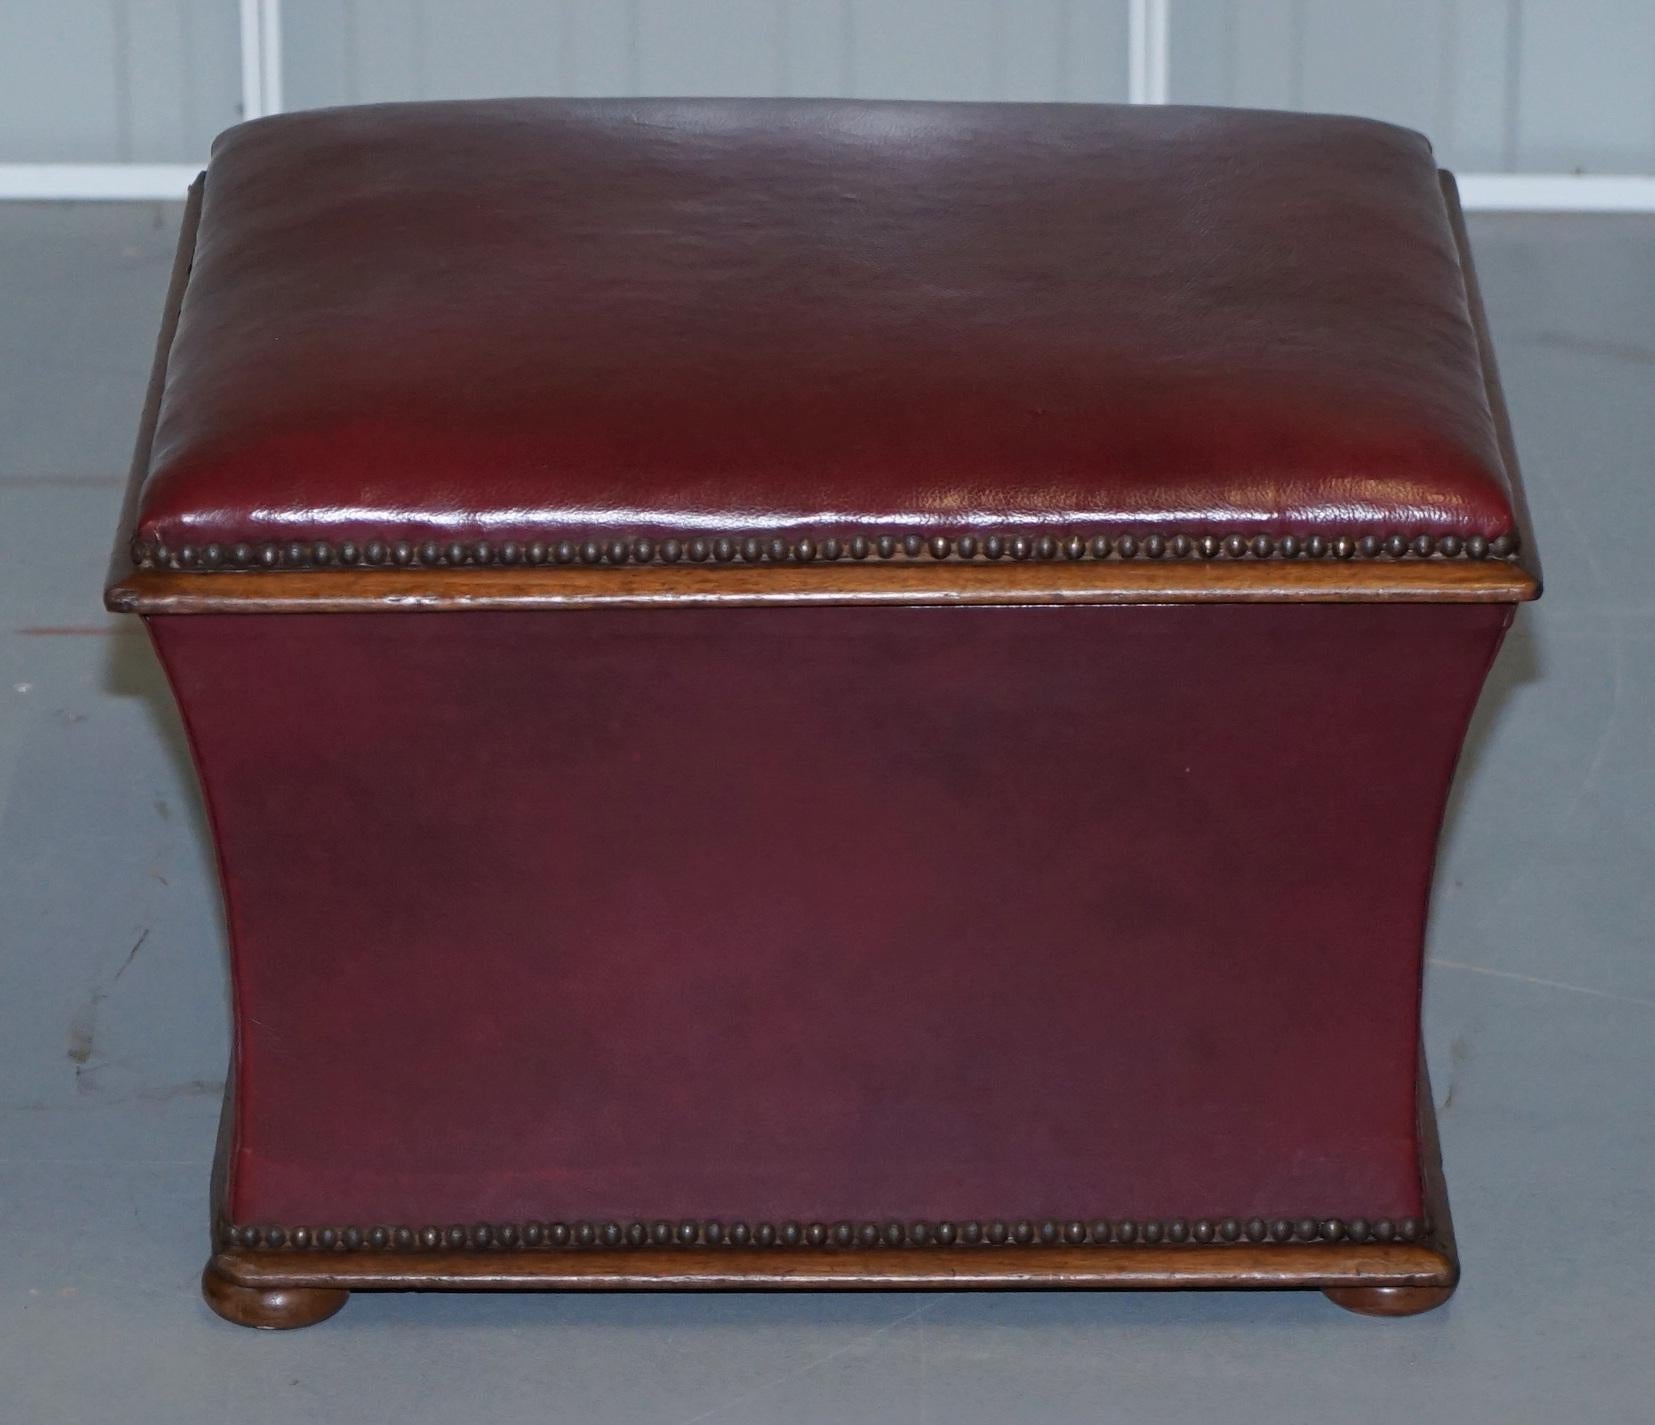 We are delighted to offer for auction this stunning original Victorian walnut and oxblood leather ottoman with internal storage

A very good looking and well made period stool, circa 1860, the frame is all solid walnut and its upholstered with